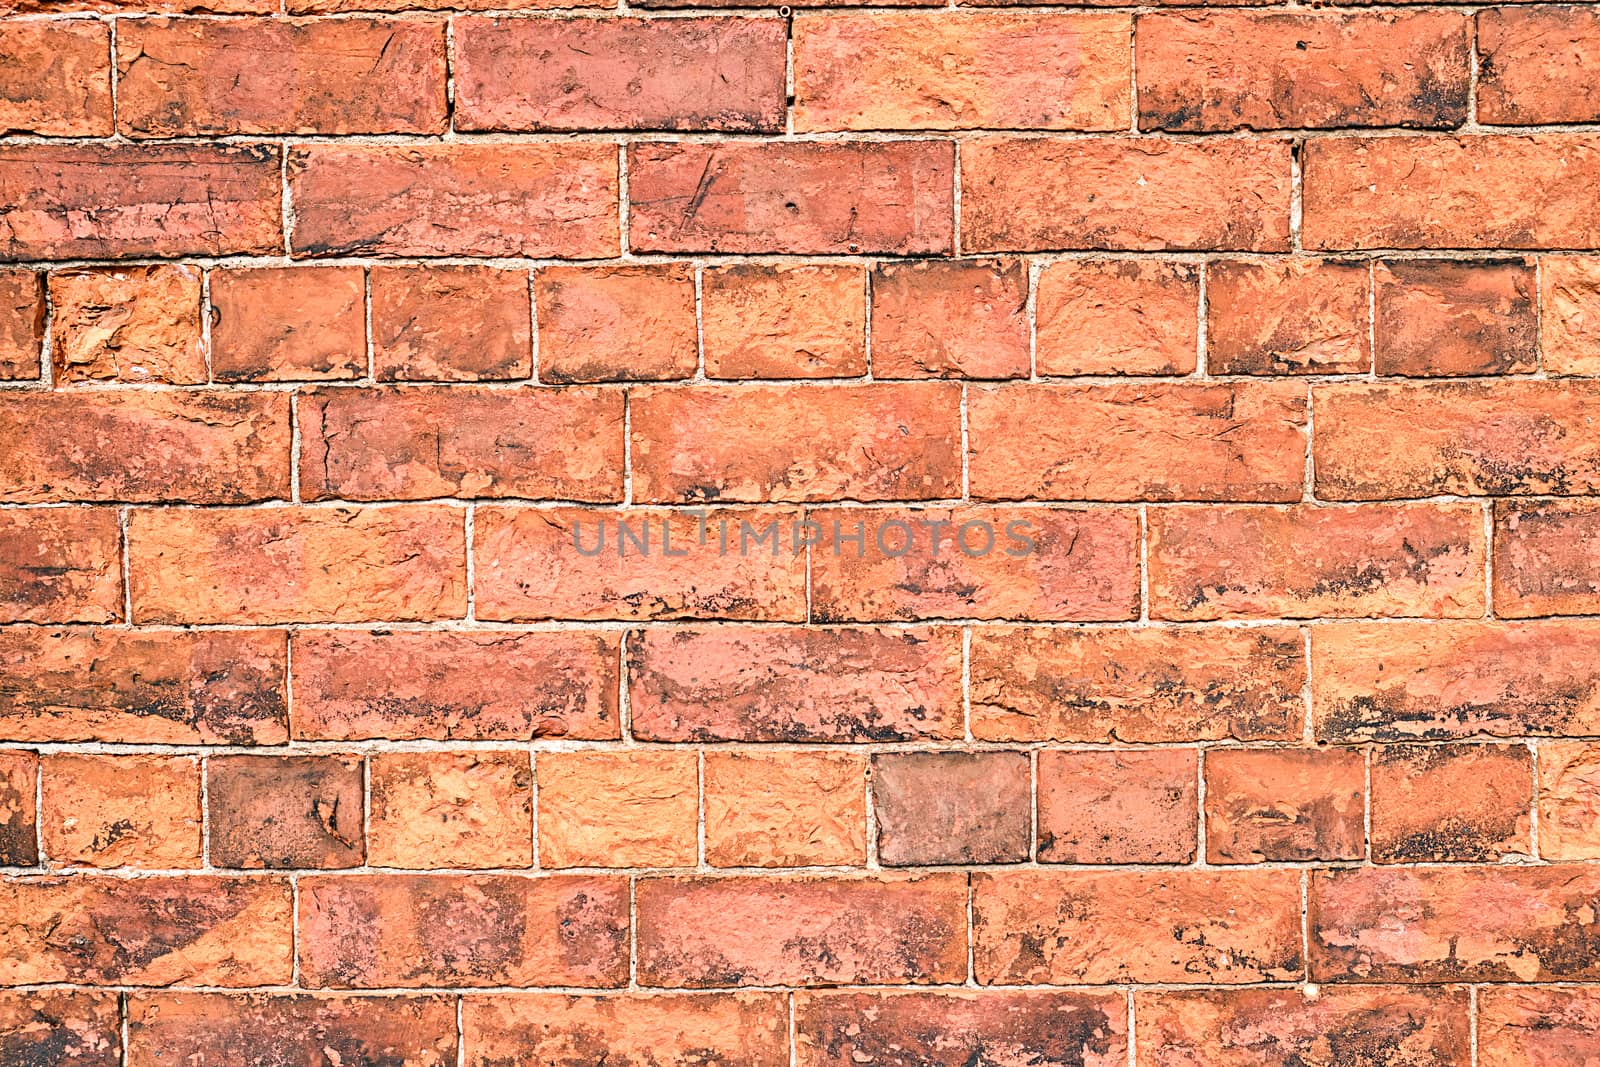 Background from an old and rugged orange brick wall